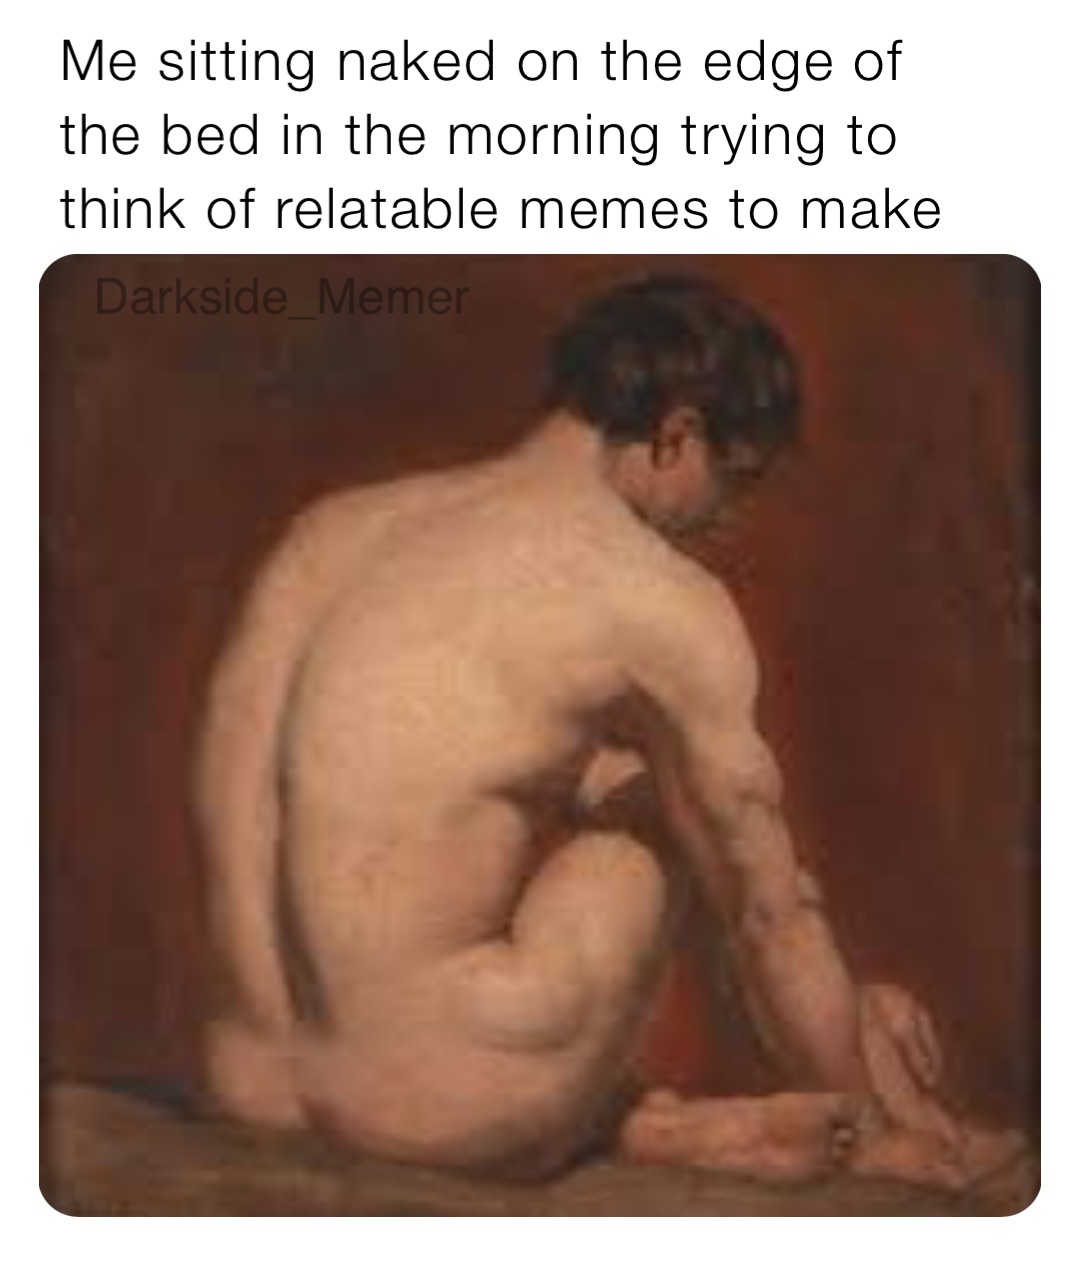 Me sitting naked on the edge of the bed in the morning trying to think of relatable memes to make